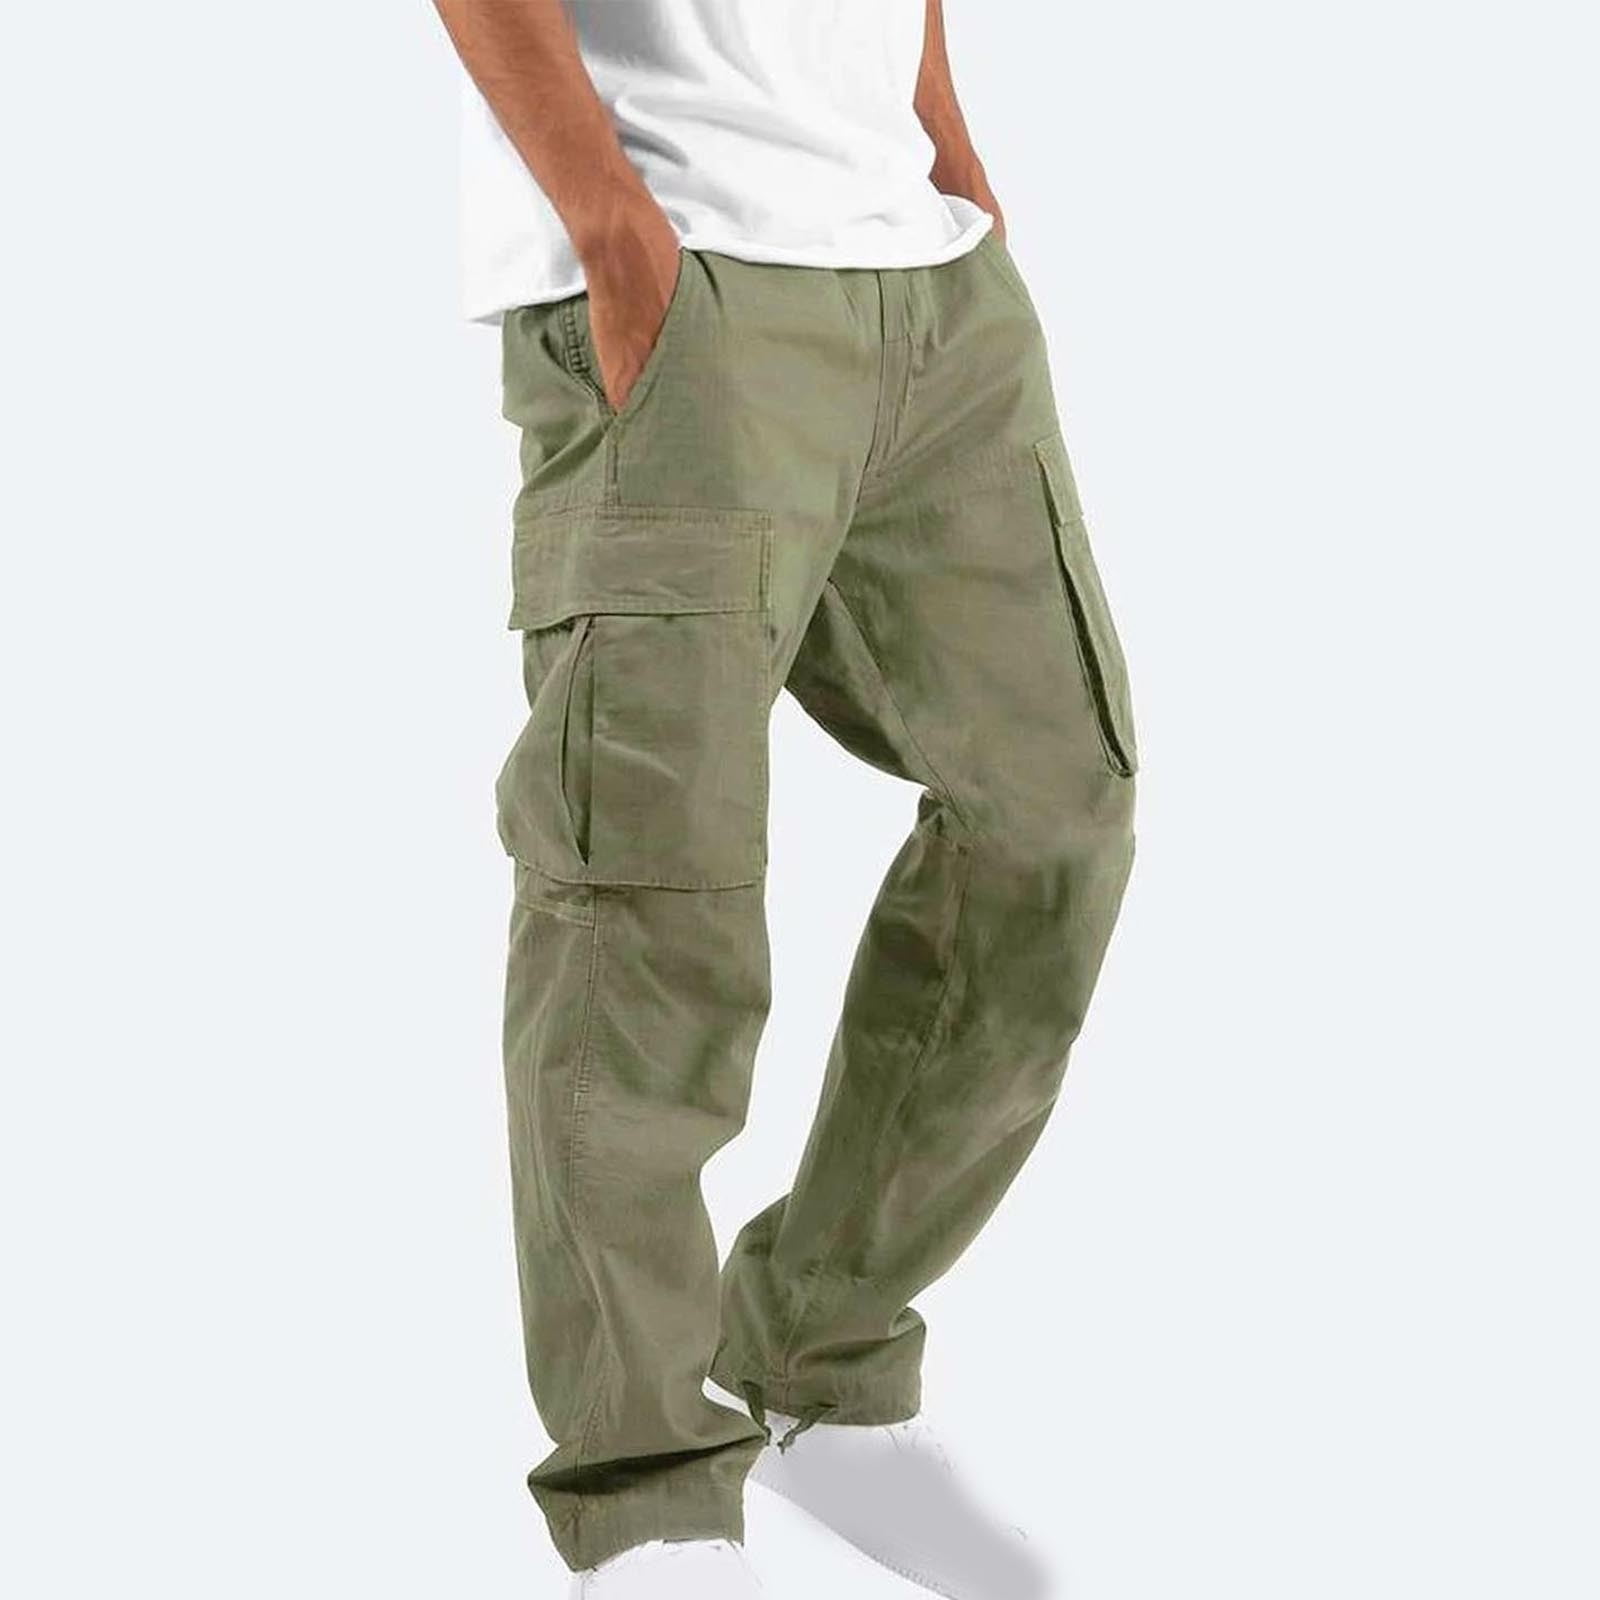 Mens Cargo Pants with Multiple Pockets Clearance Relaxed Fit Stretch  Outdoor Carpenter Pants for Man,Khaki Size 5XL